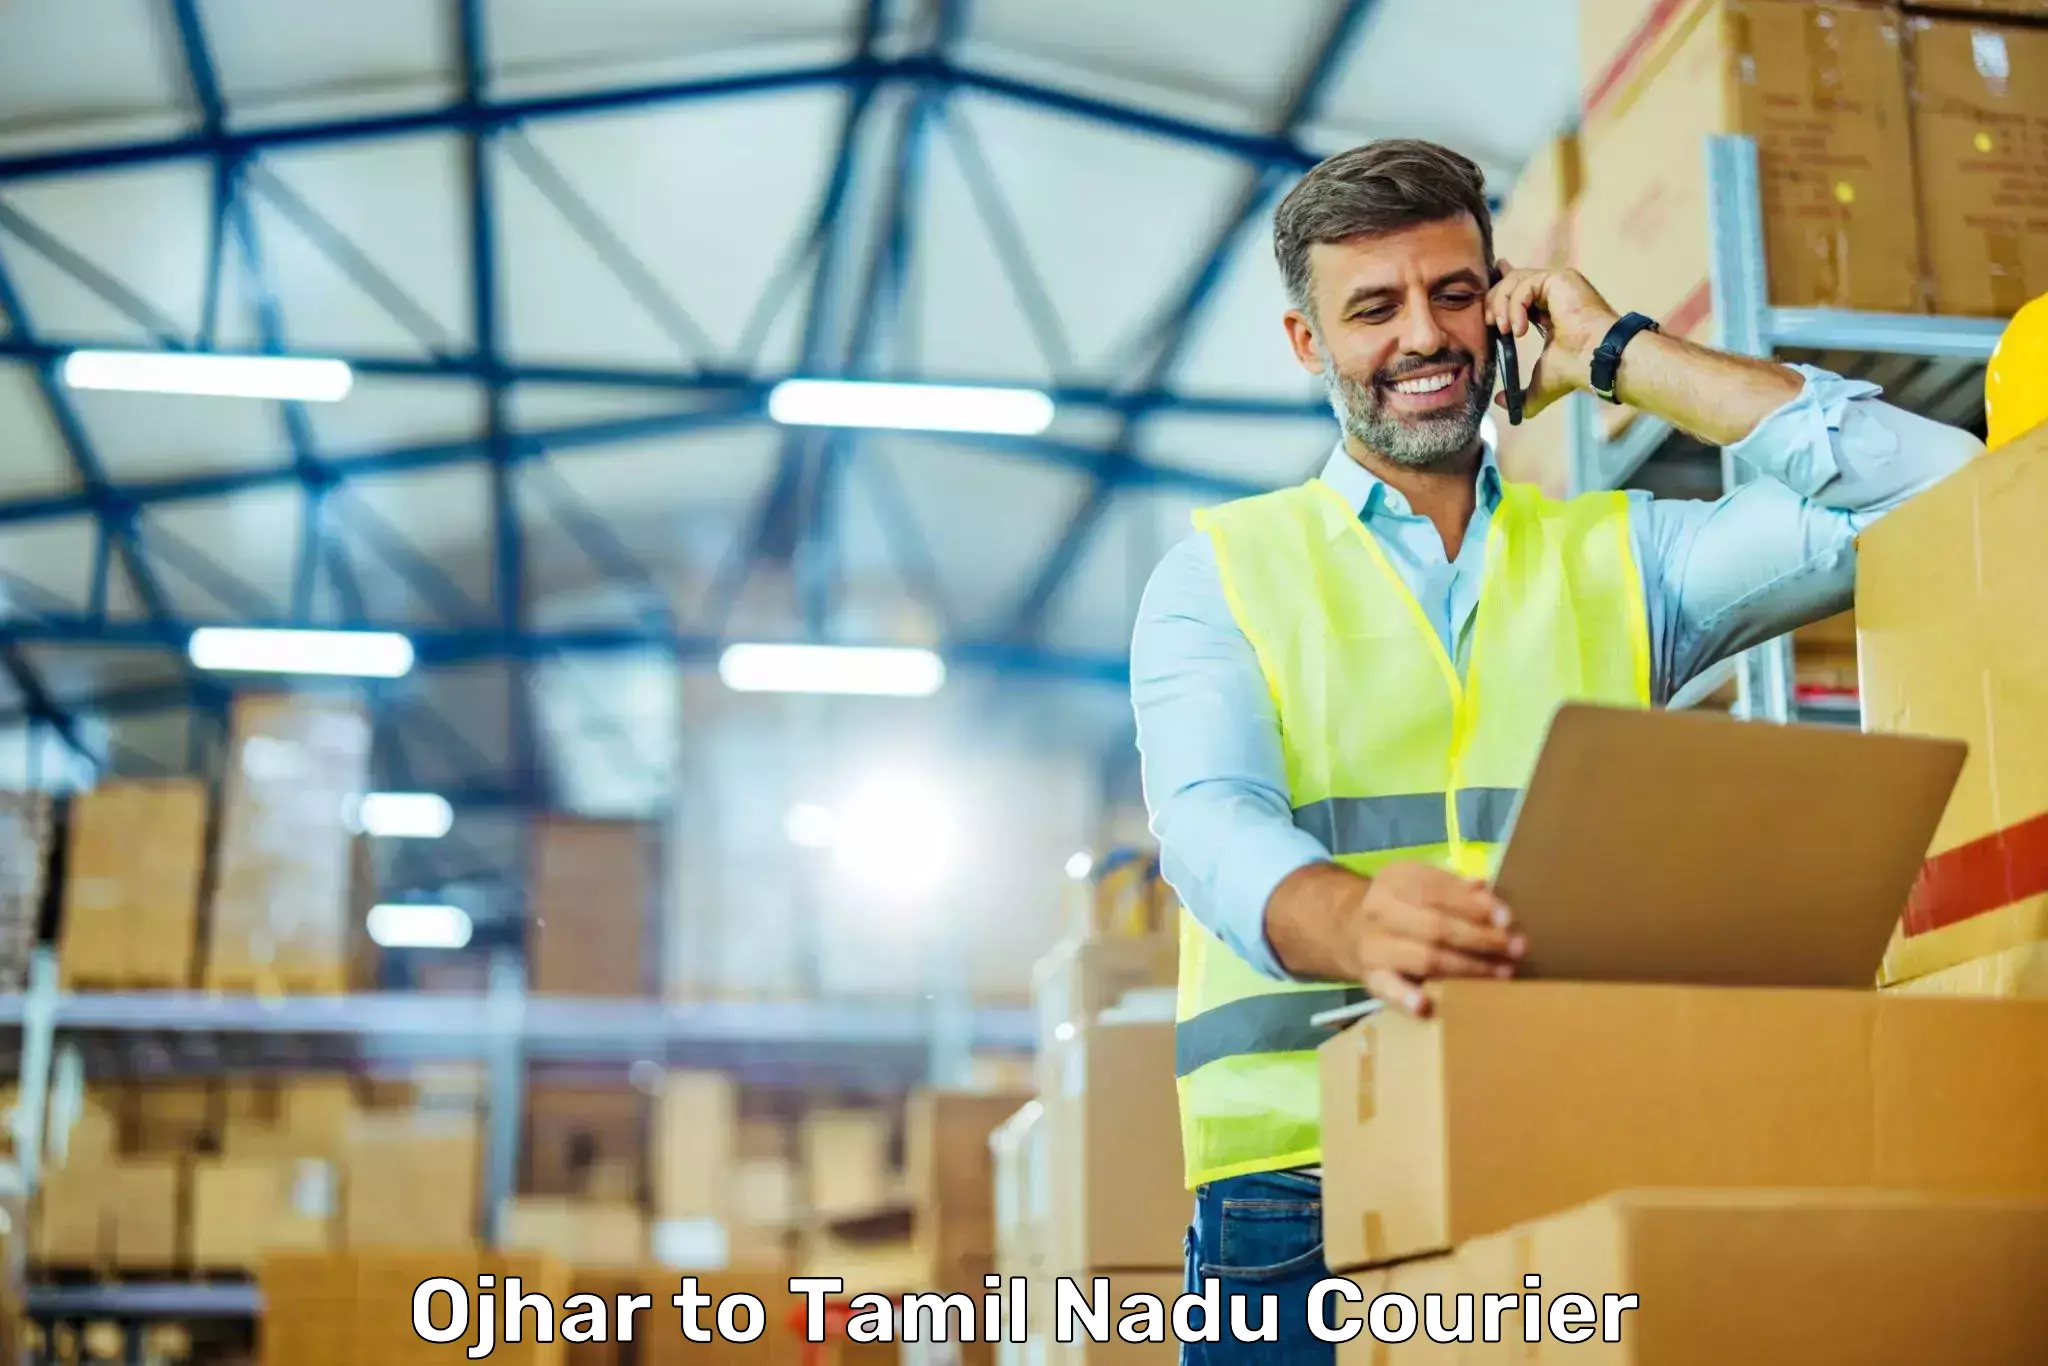 Efficient courier operations Ojhar to Tamil Nadu